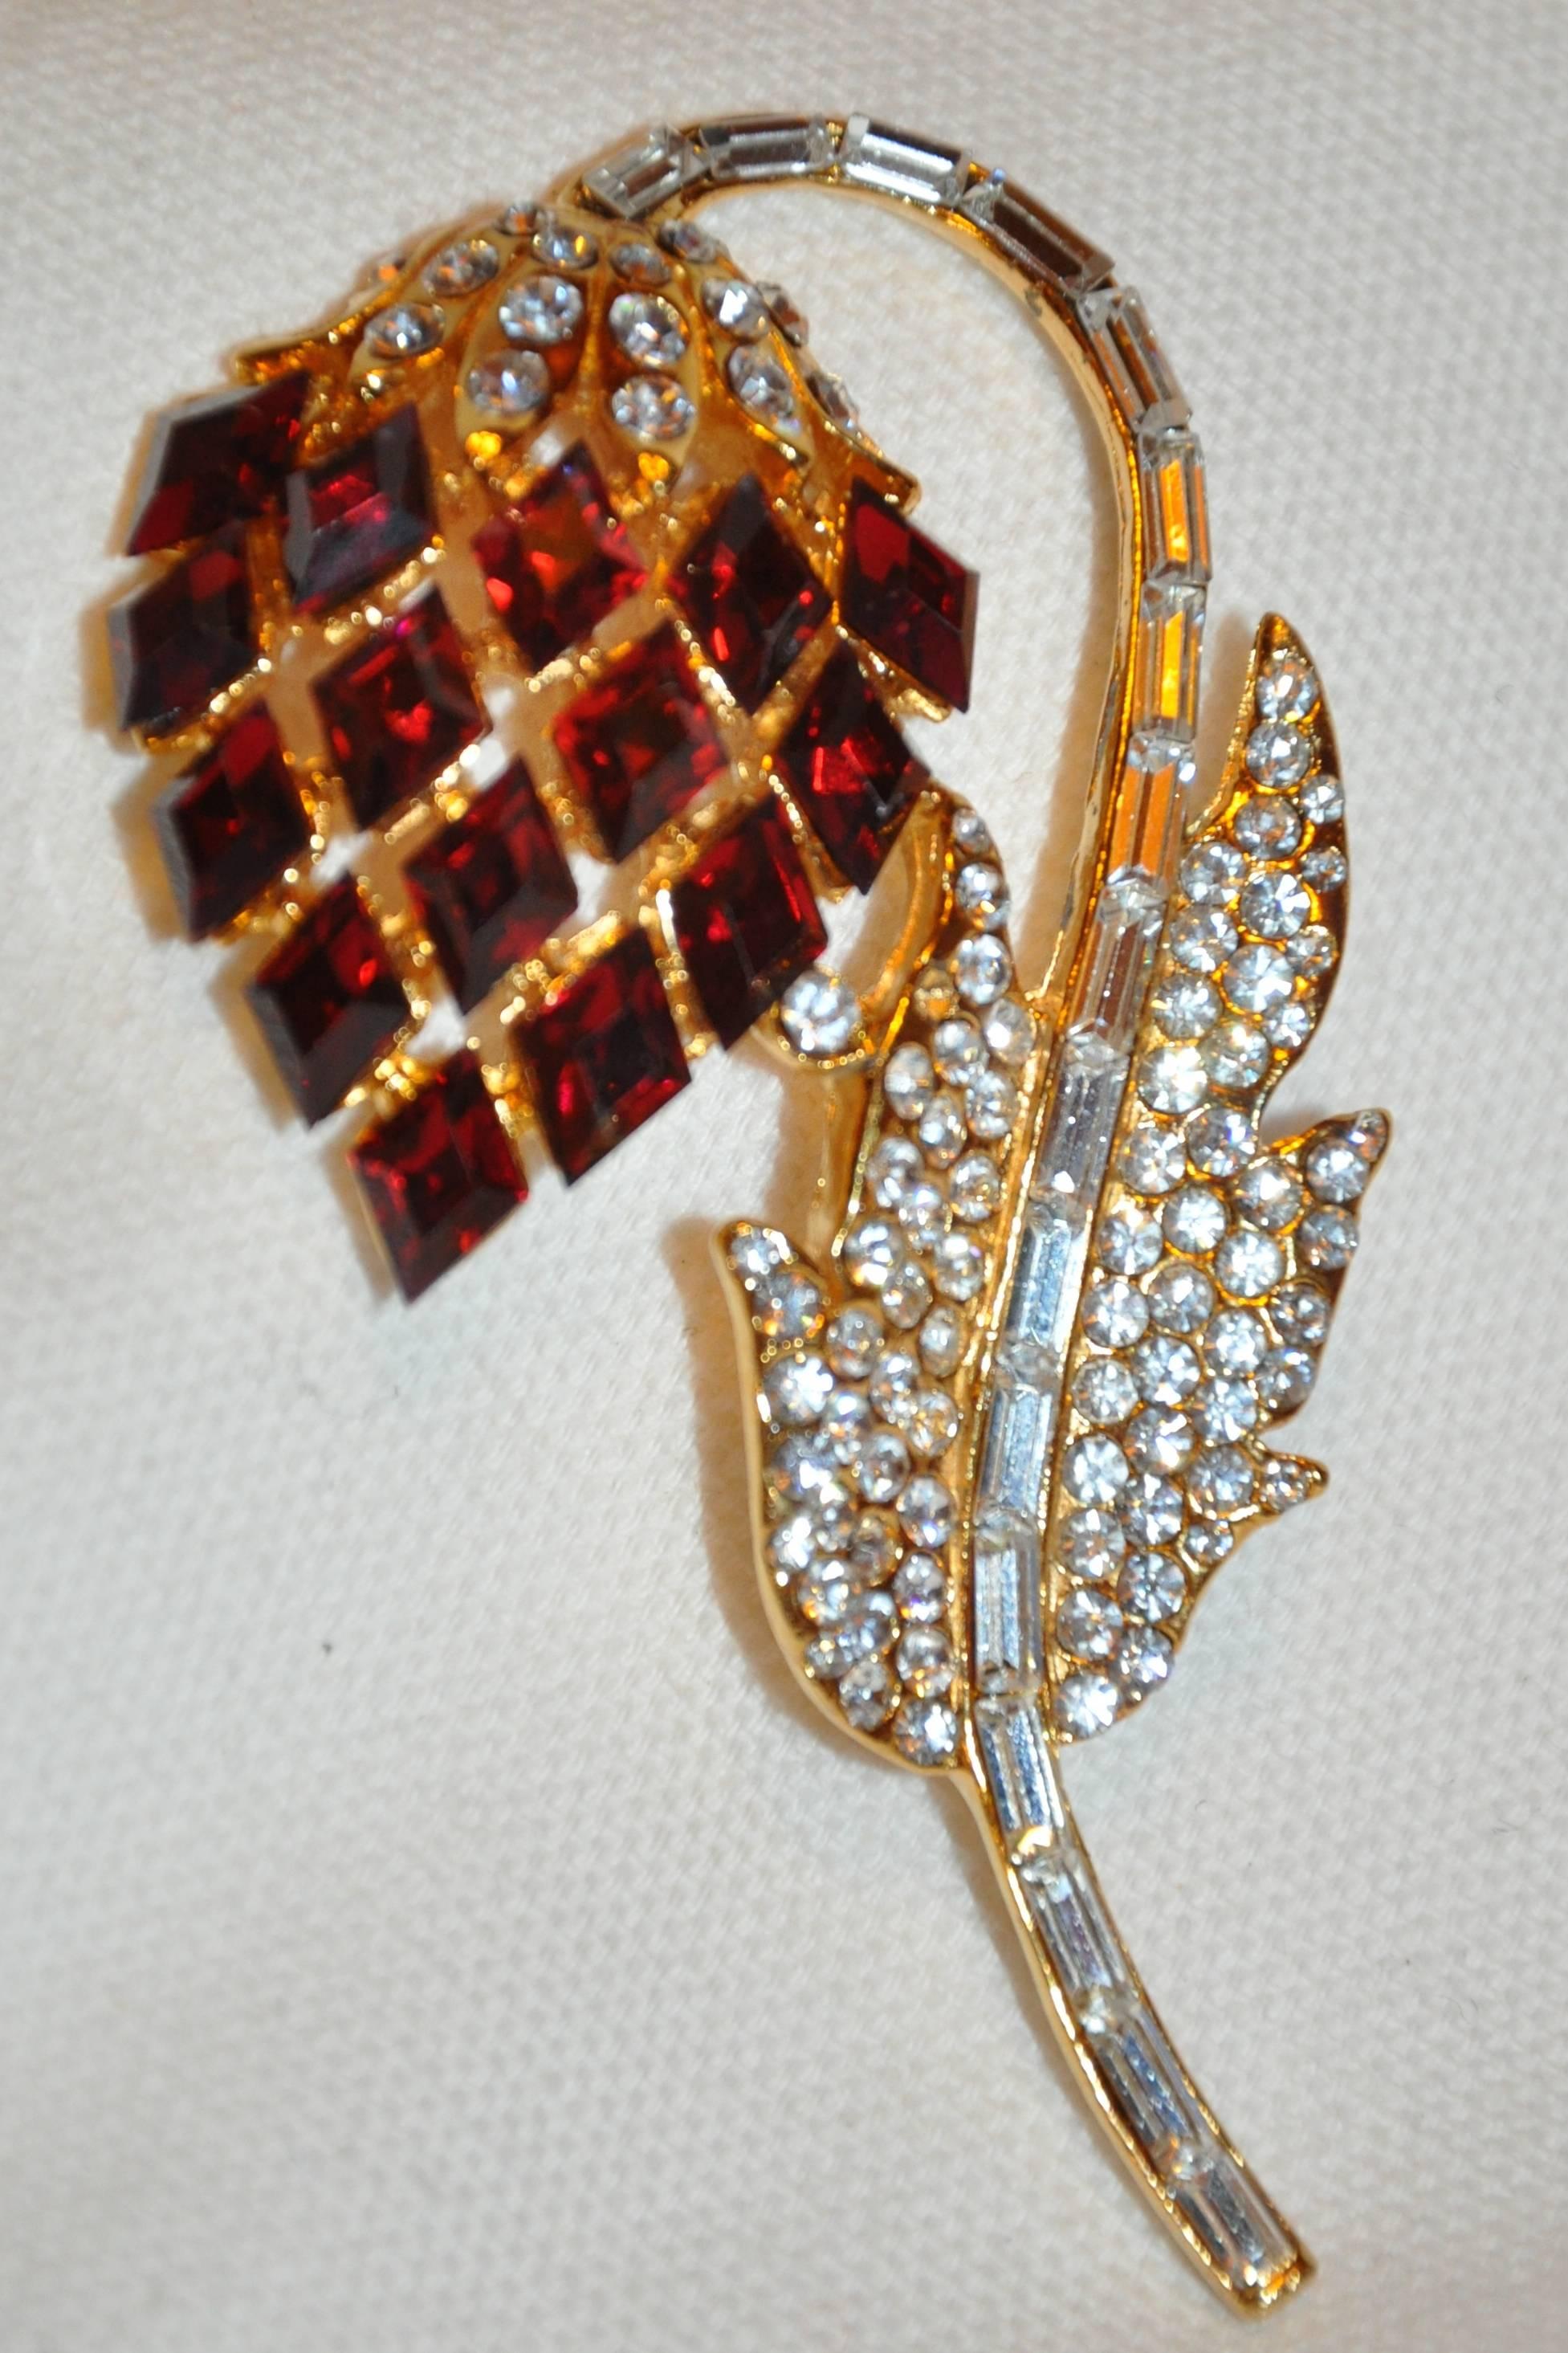      This magnificent Floral brooch, originality used as a brooch, now, as a pendant, can be hung through the loop of the floral stem. Set with magnificent faux brilliant rubies & faux diamonds, the length measures 2 6/8", width is 1